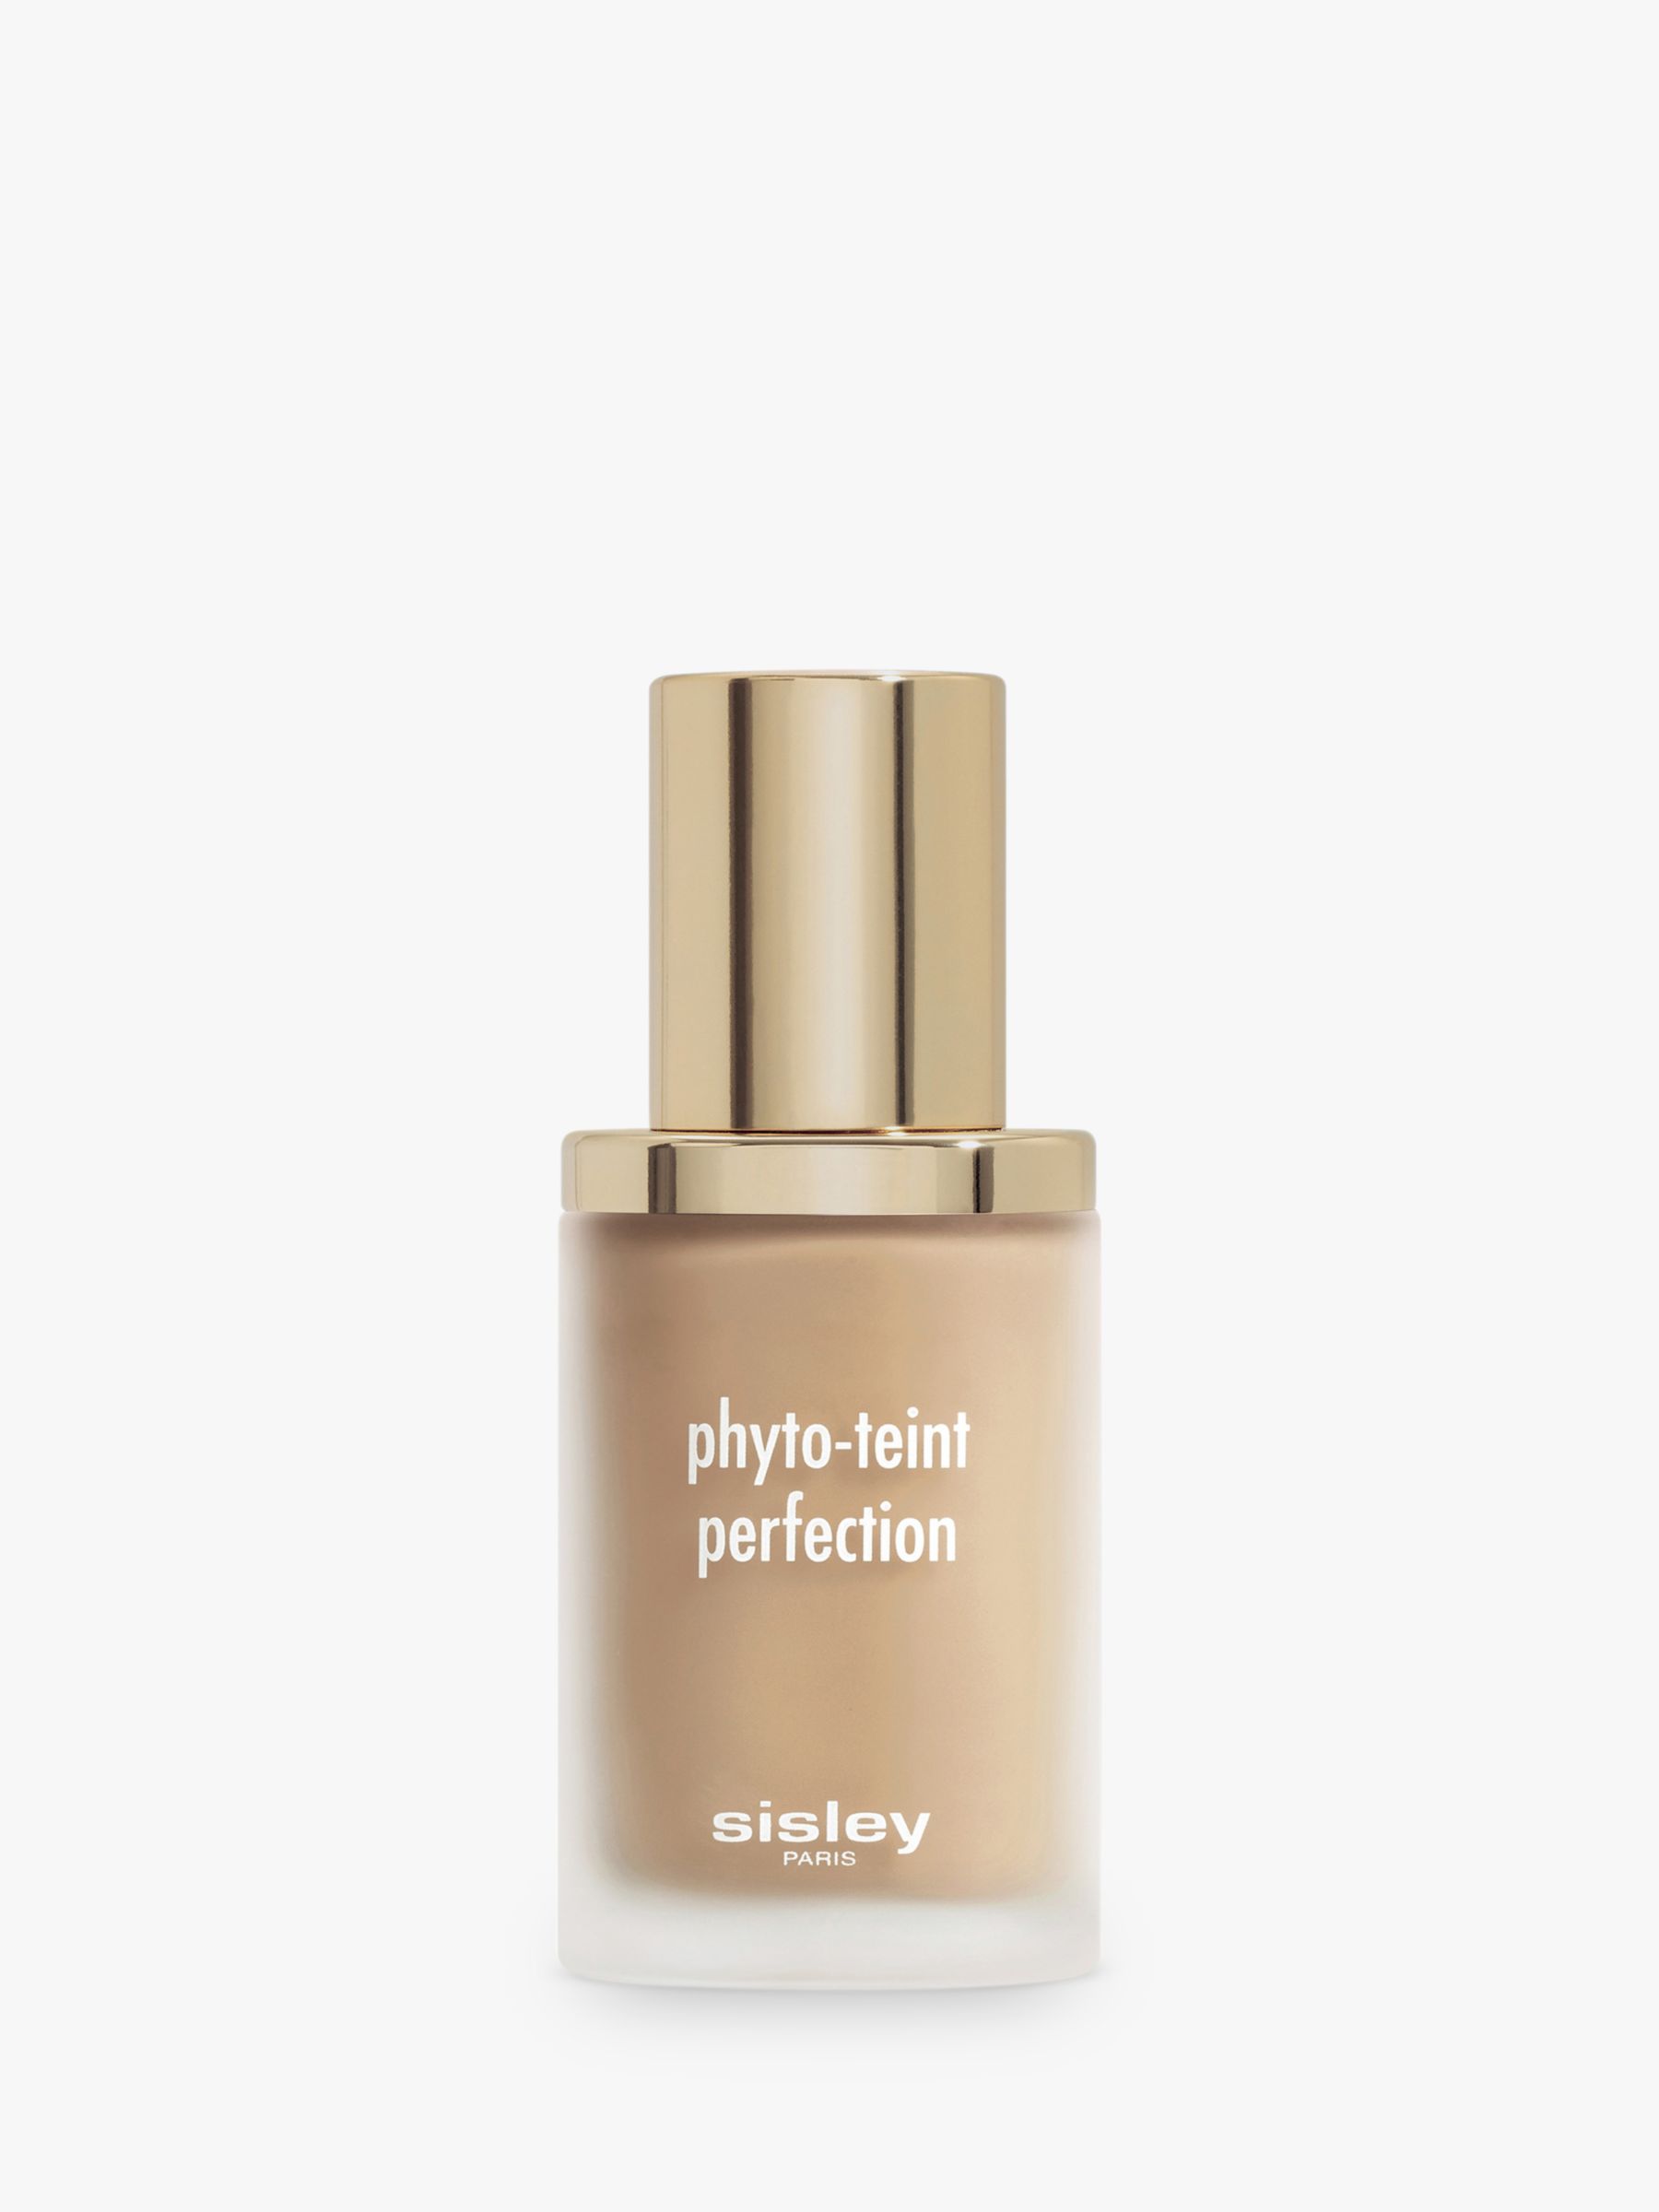 Sisley-Paris Phyto-Teint Perfection Foundation, 4N Biscuit